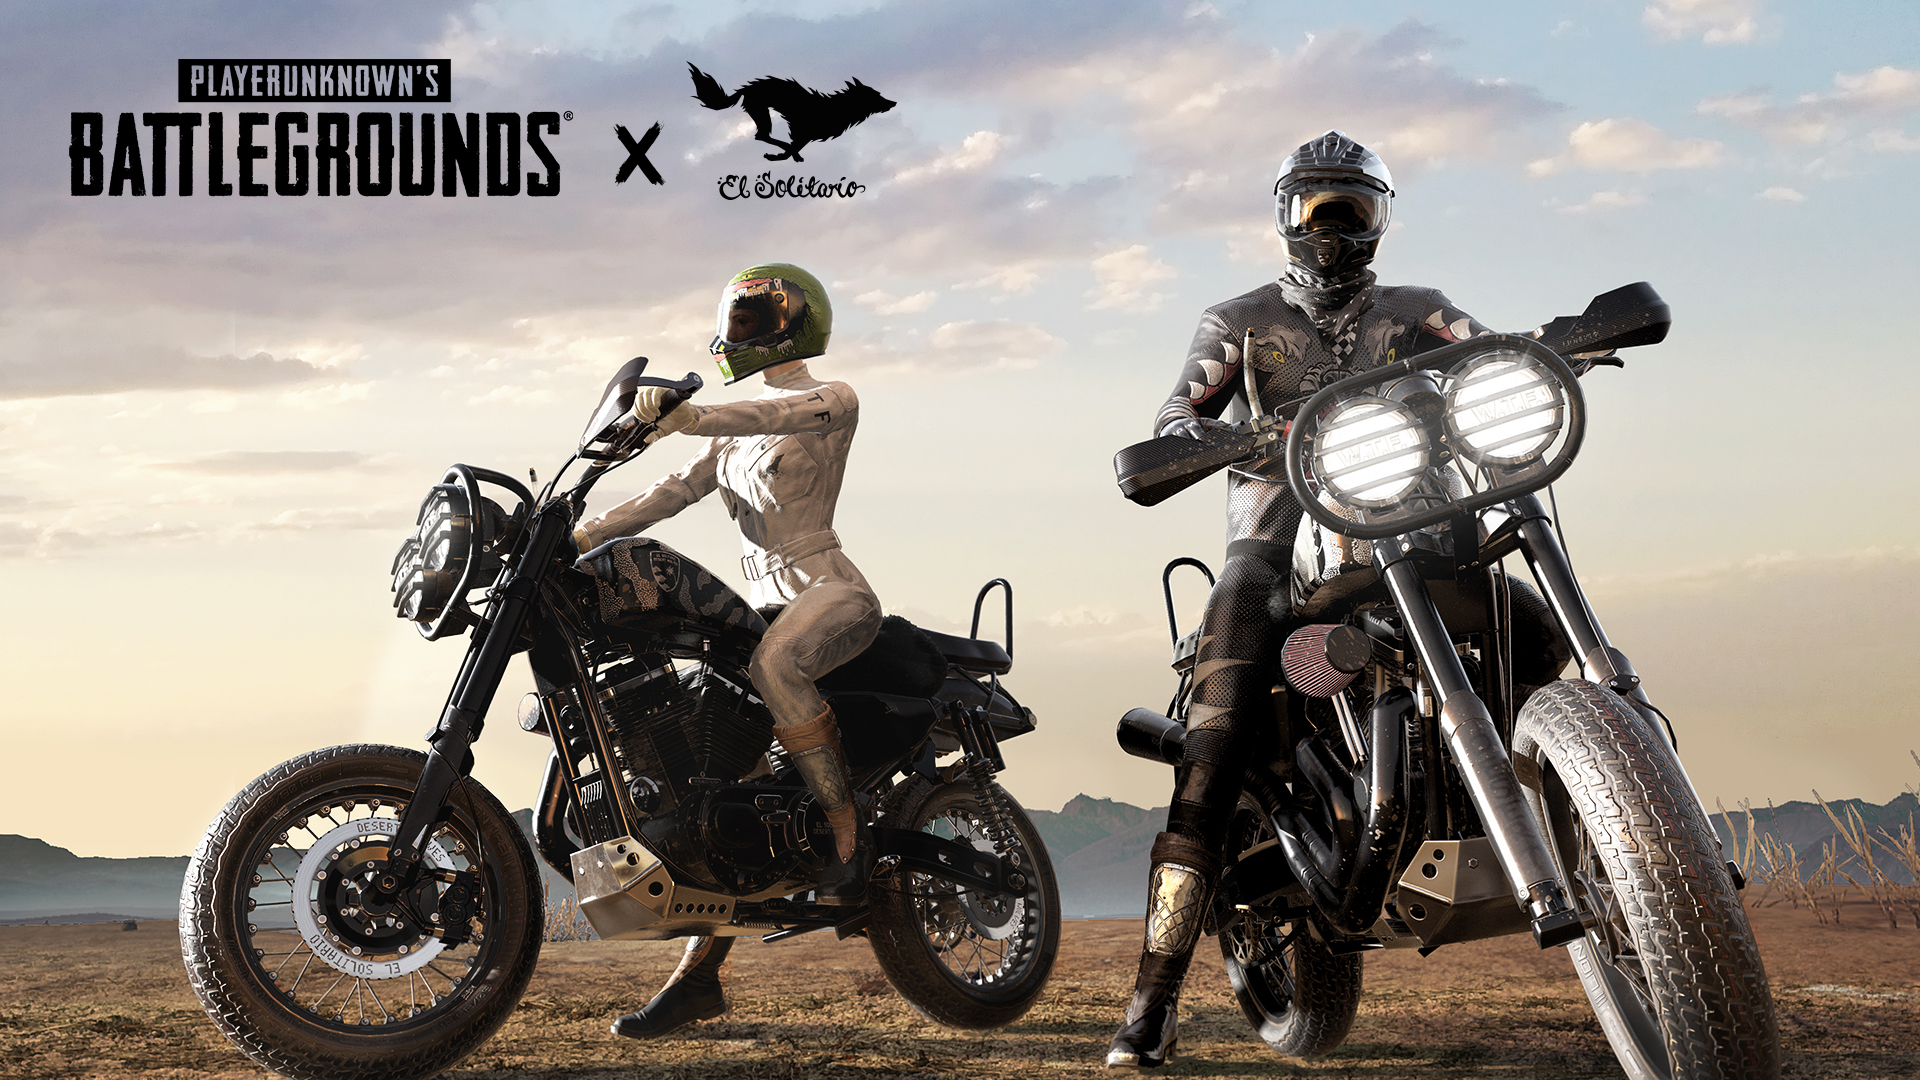 The 12 1 Update Of Playerunknown S Battlegrounds Is Launched On The Test Server And The Brand El Solitario Cooperates With The Launch Of The Modeling Vehicle Playerunknown S Battlegrounds Archyde